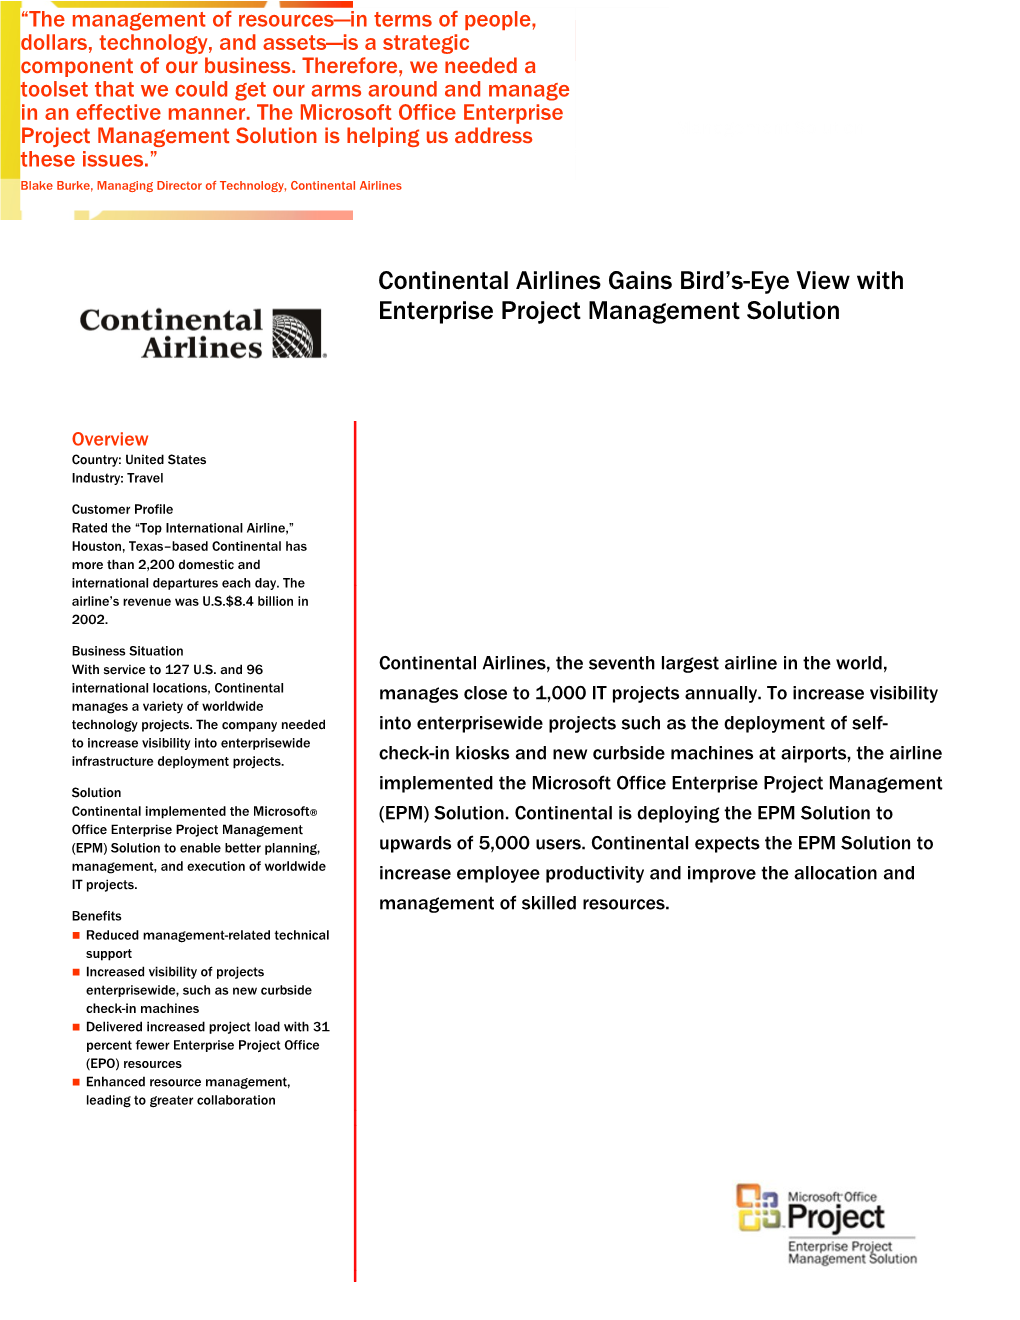 Continental Airlines Gains Bird S-Eye View with Enterprise Project Management Solution